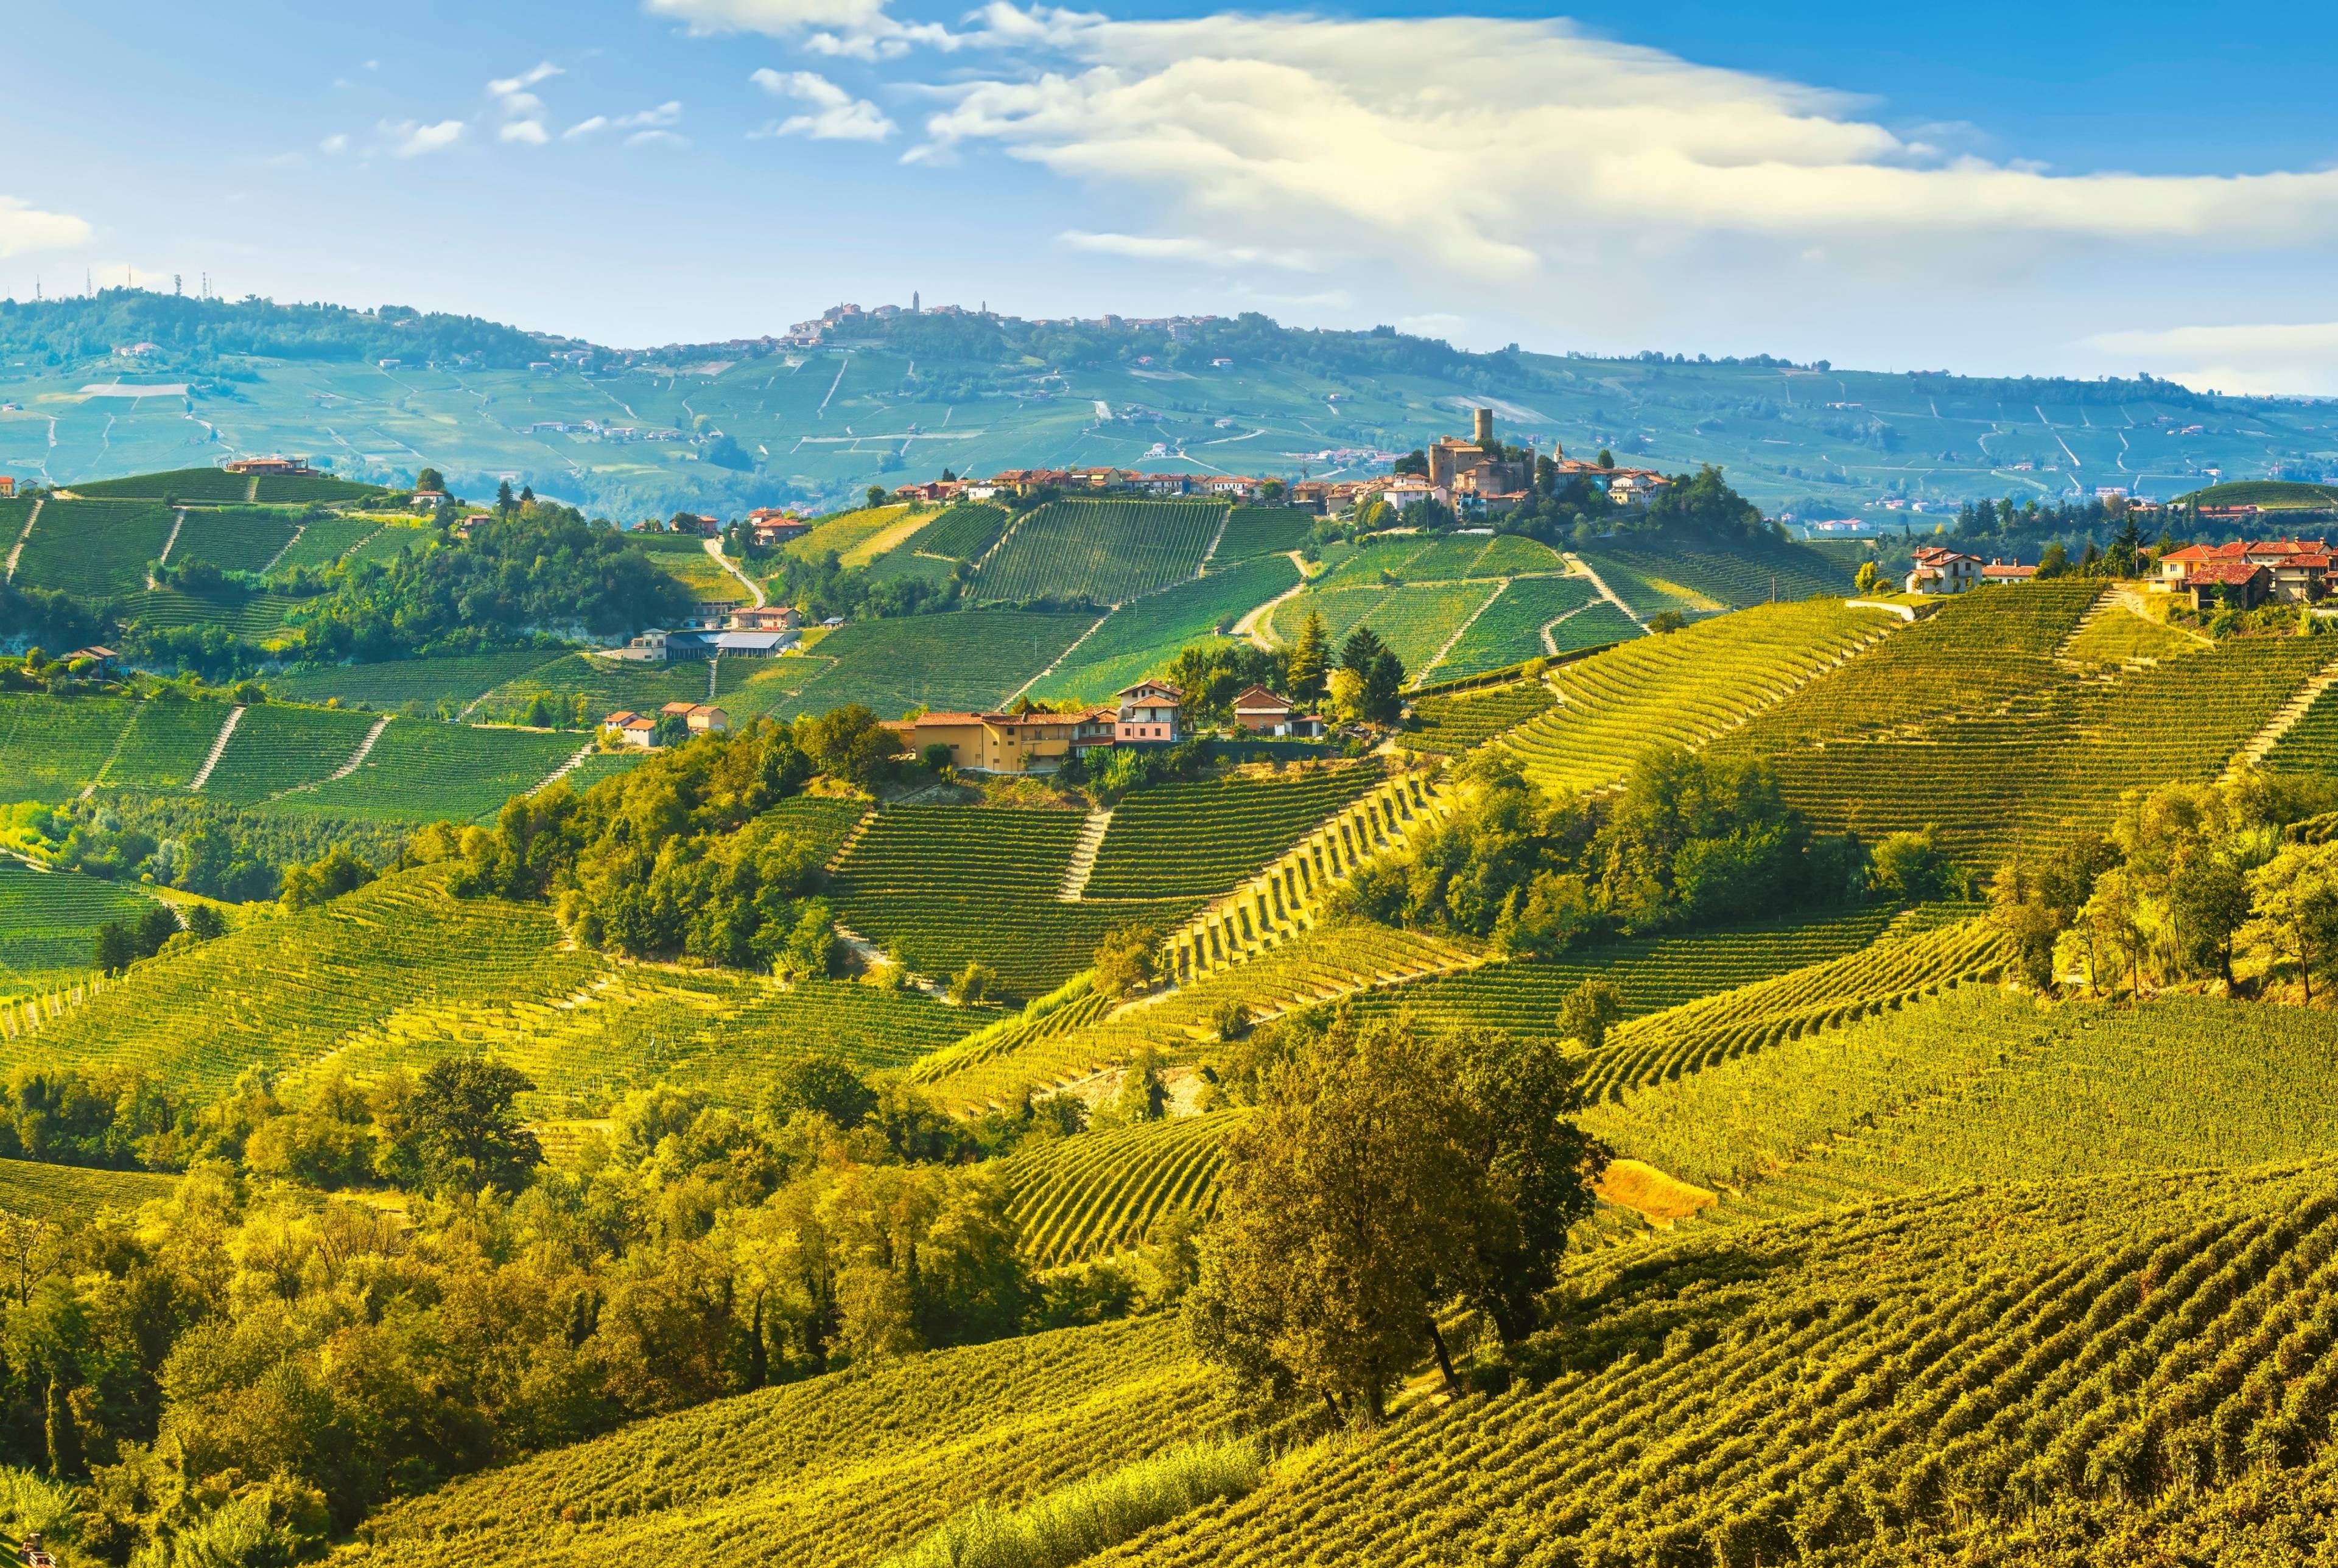 Discover Piedmont Region of Italy: Small Towns with Big Flavors and Rich History